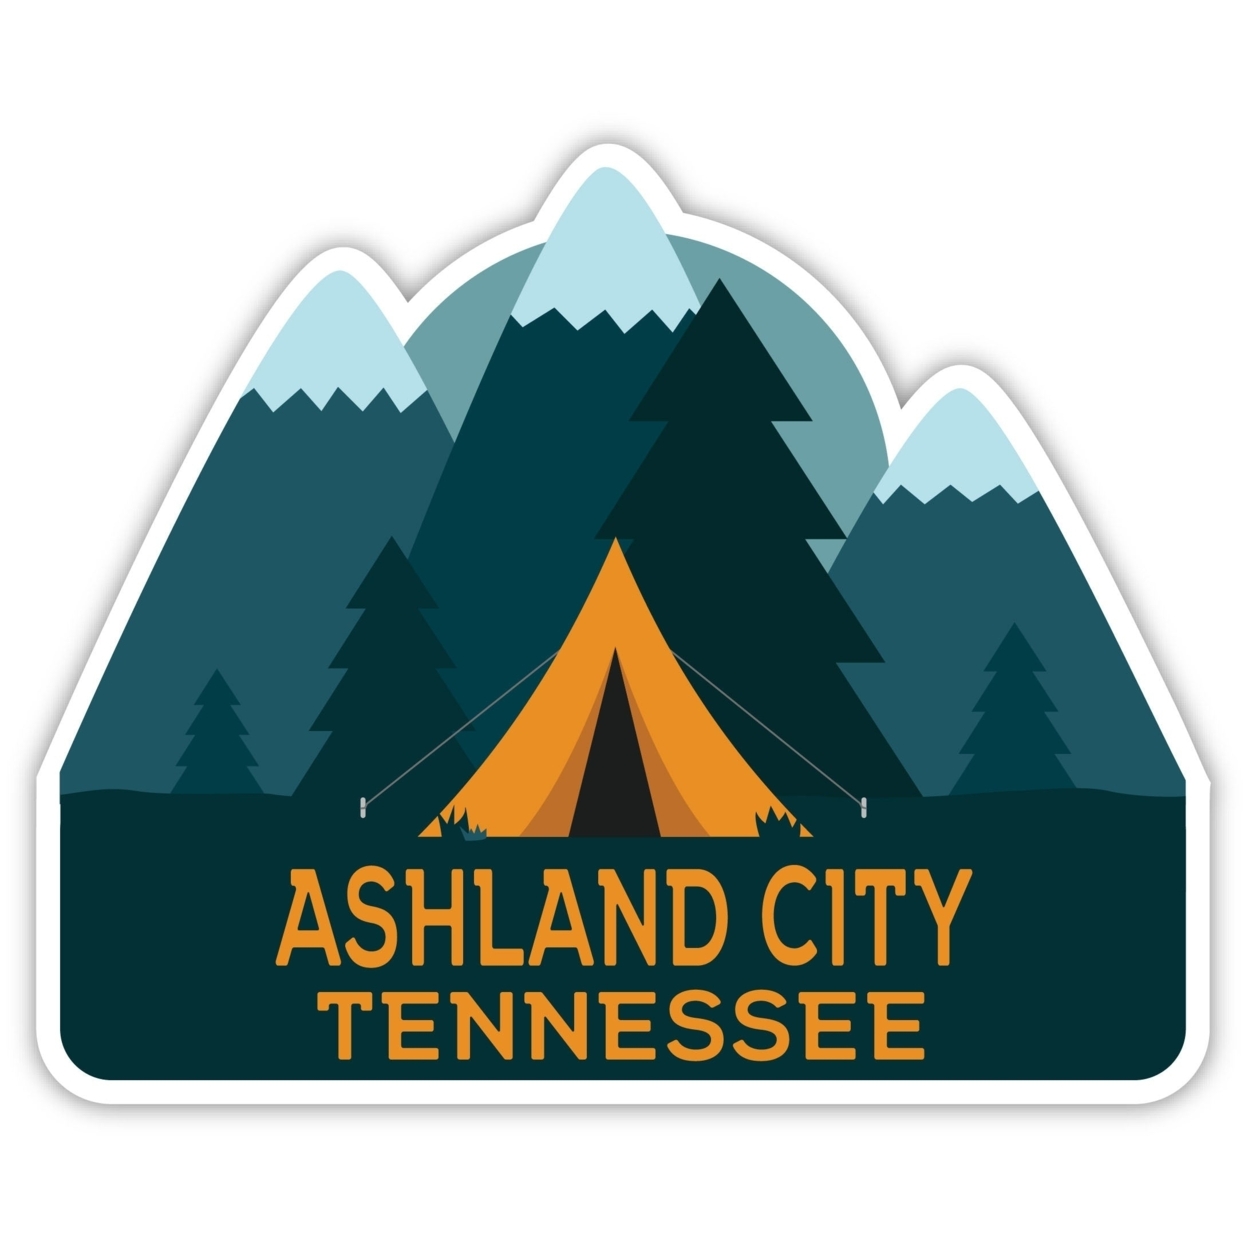 Ashland City Tennessee Souvenir Decorative Stickers (Choose Theme And Size) - 4-Pack, 10-Inch, Tent